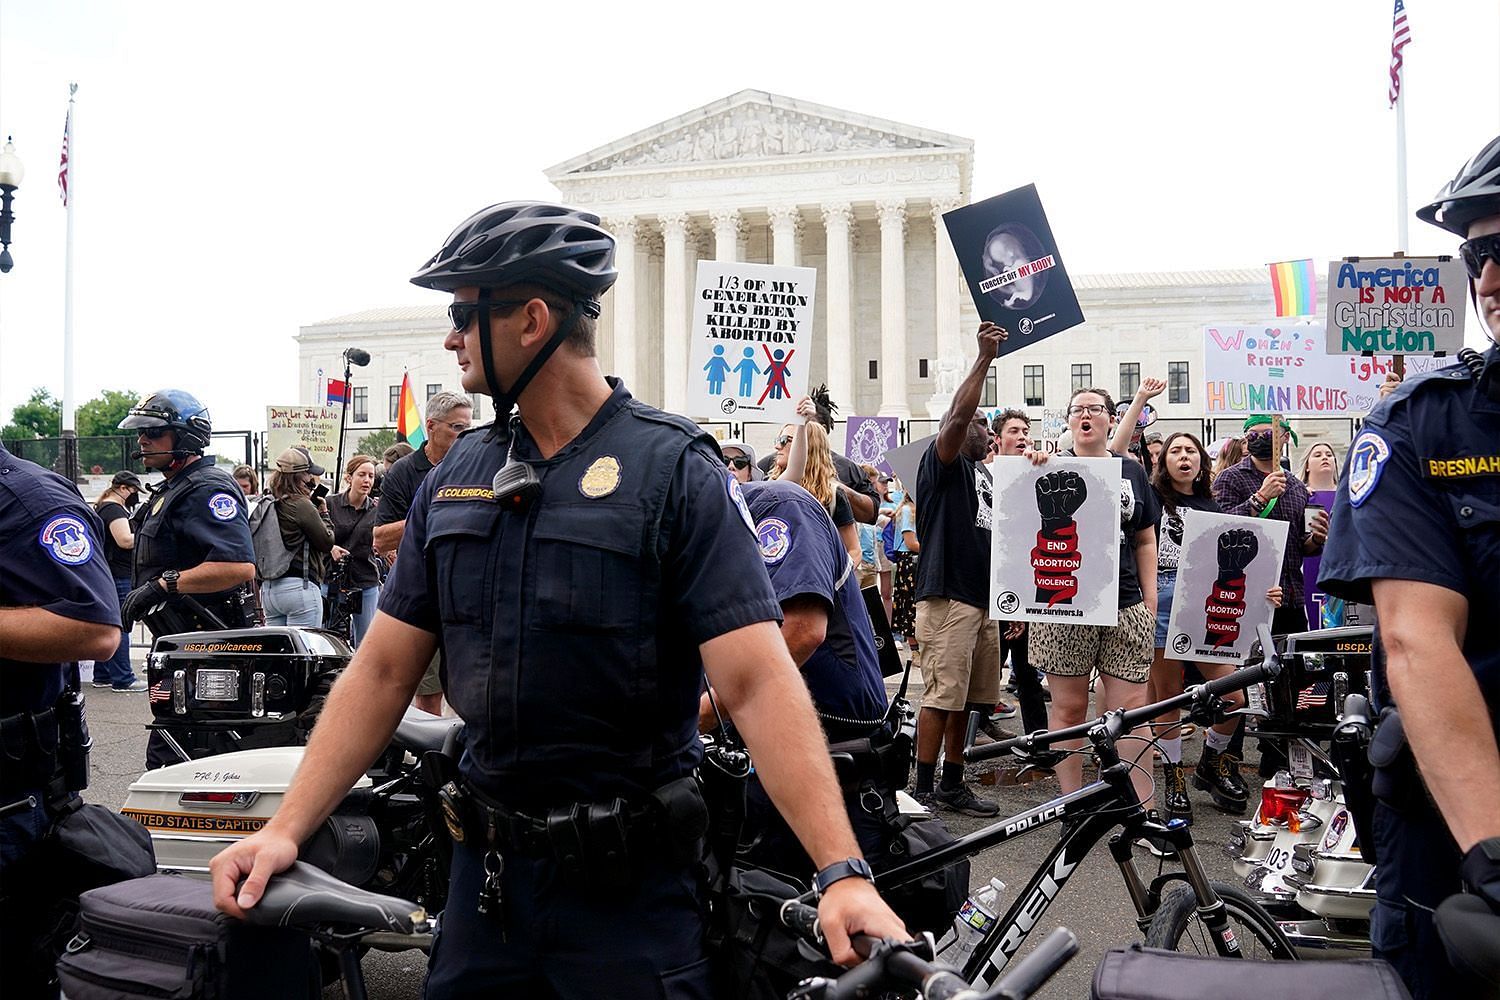 Protestors outside the U.S. Supreme Court. Source: Front Office Sports/Jack Gruber - USA Today